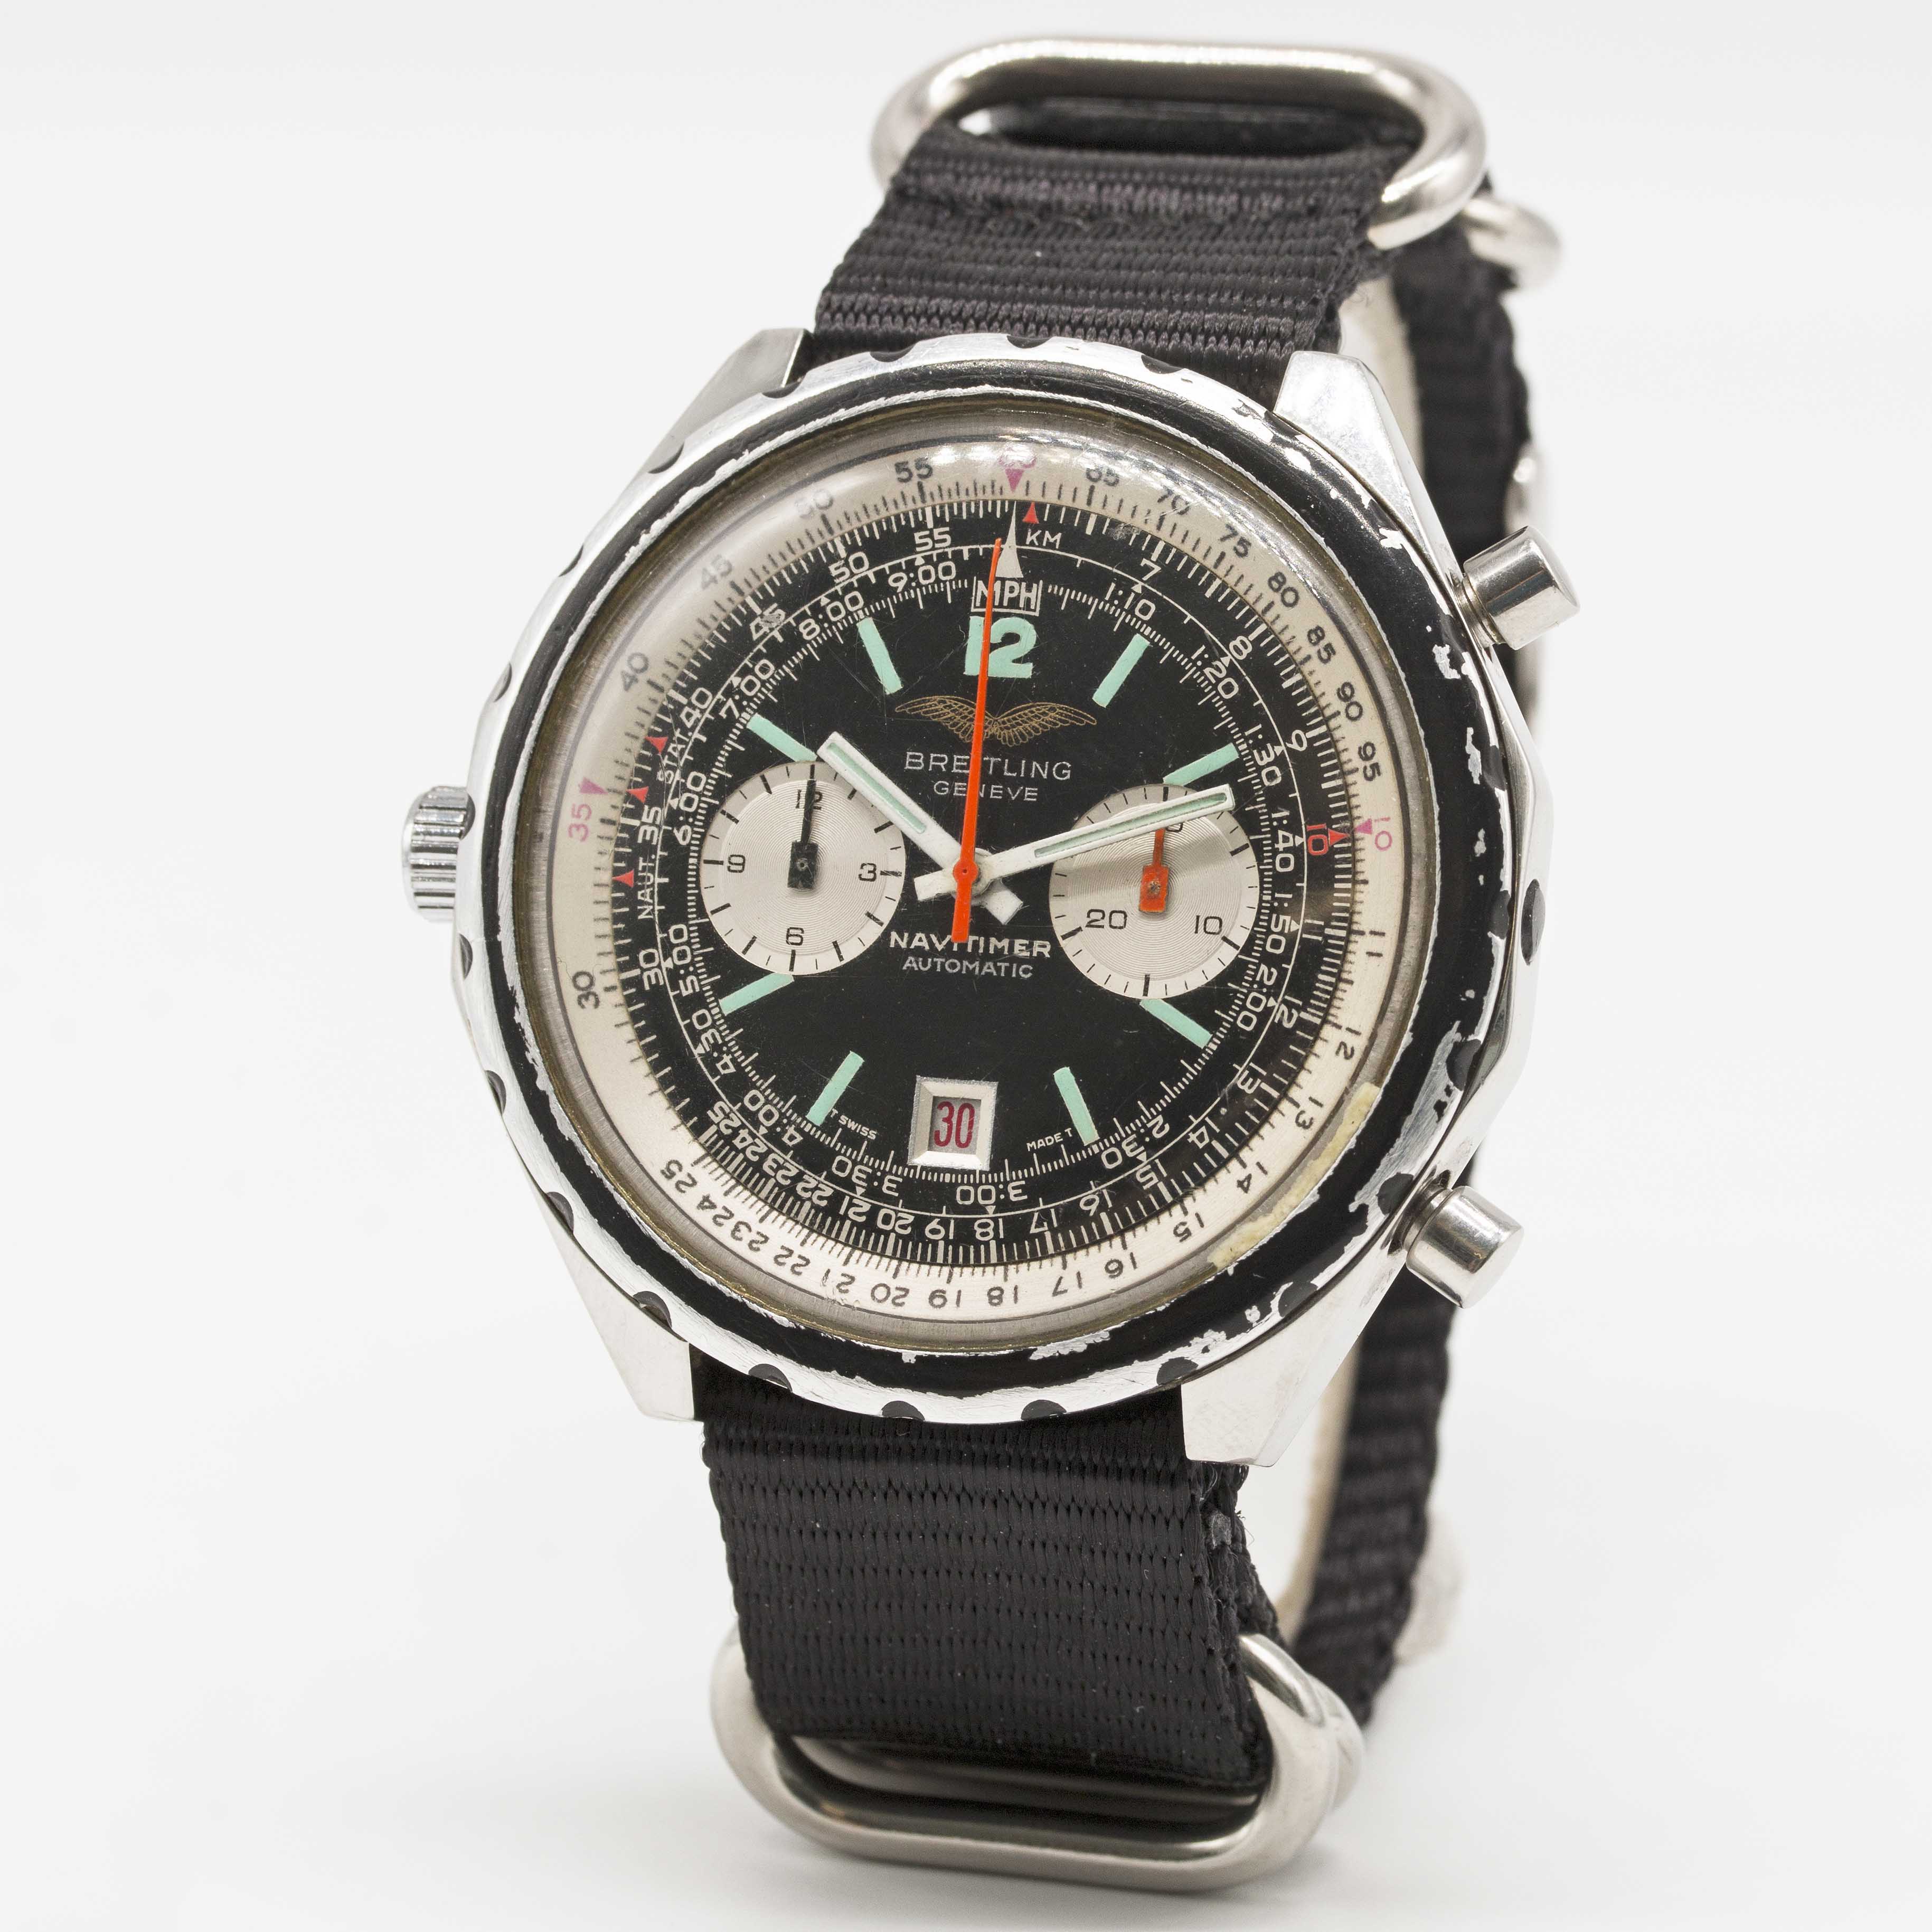 A GENTLEMAN'S STAINLESS STEEL IRAQI MILITARY AIR FORCE BREITLING AUTOMATIC NAVITIMER PILOTS - Image 3 of 6